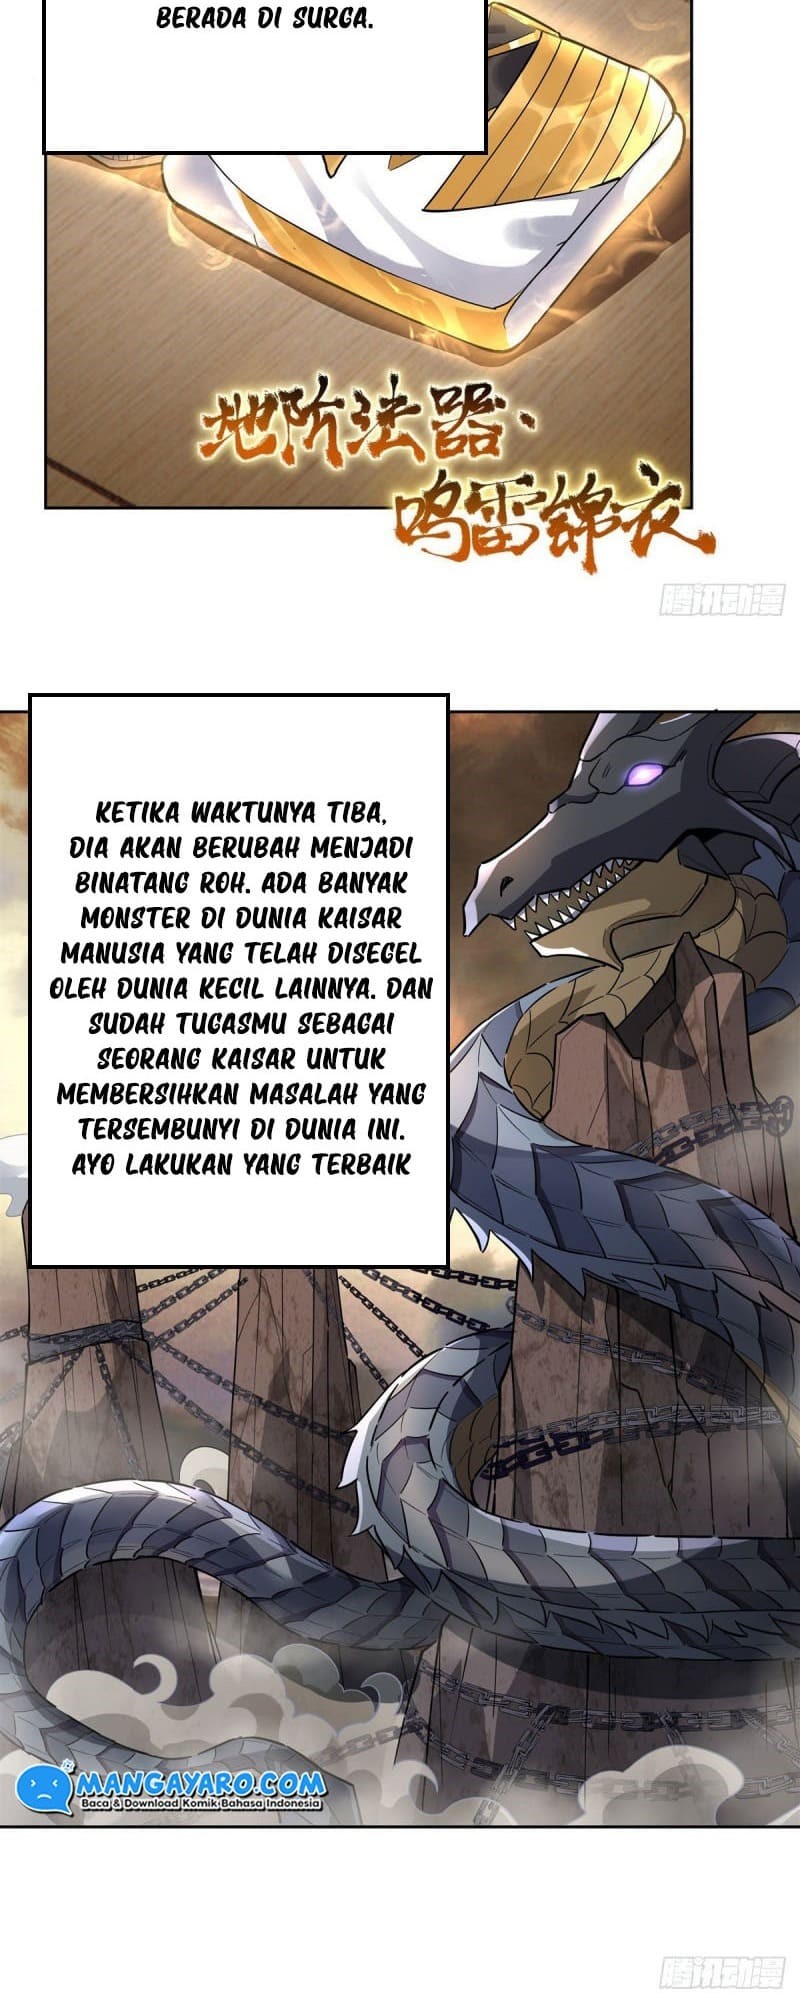 Dilarang COPAS - situs resmi www.mangacanblog.com - Komik my female apprentices are all big shots from the future 037 - chapter 37 38 Indonesia my female apprentices are all big shots from the future 037 - chapter 37 Terbaru 6|Baca Manga Komik Indonesia|Mangacan